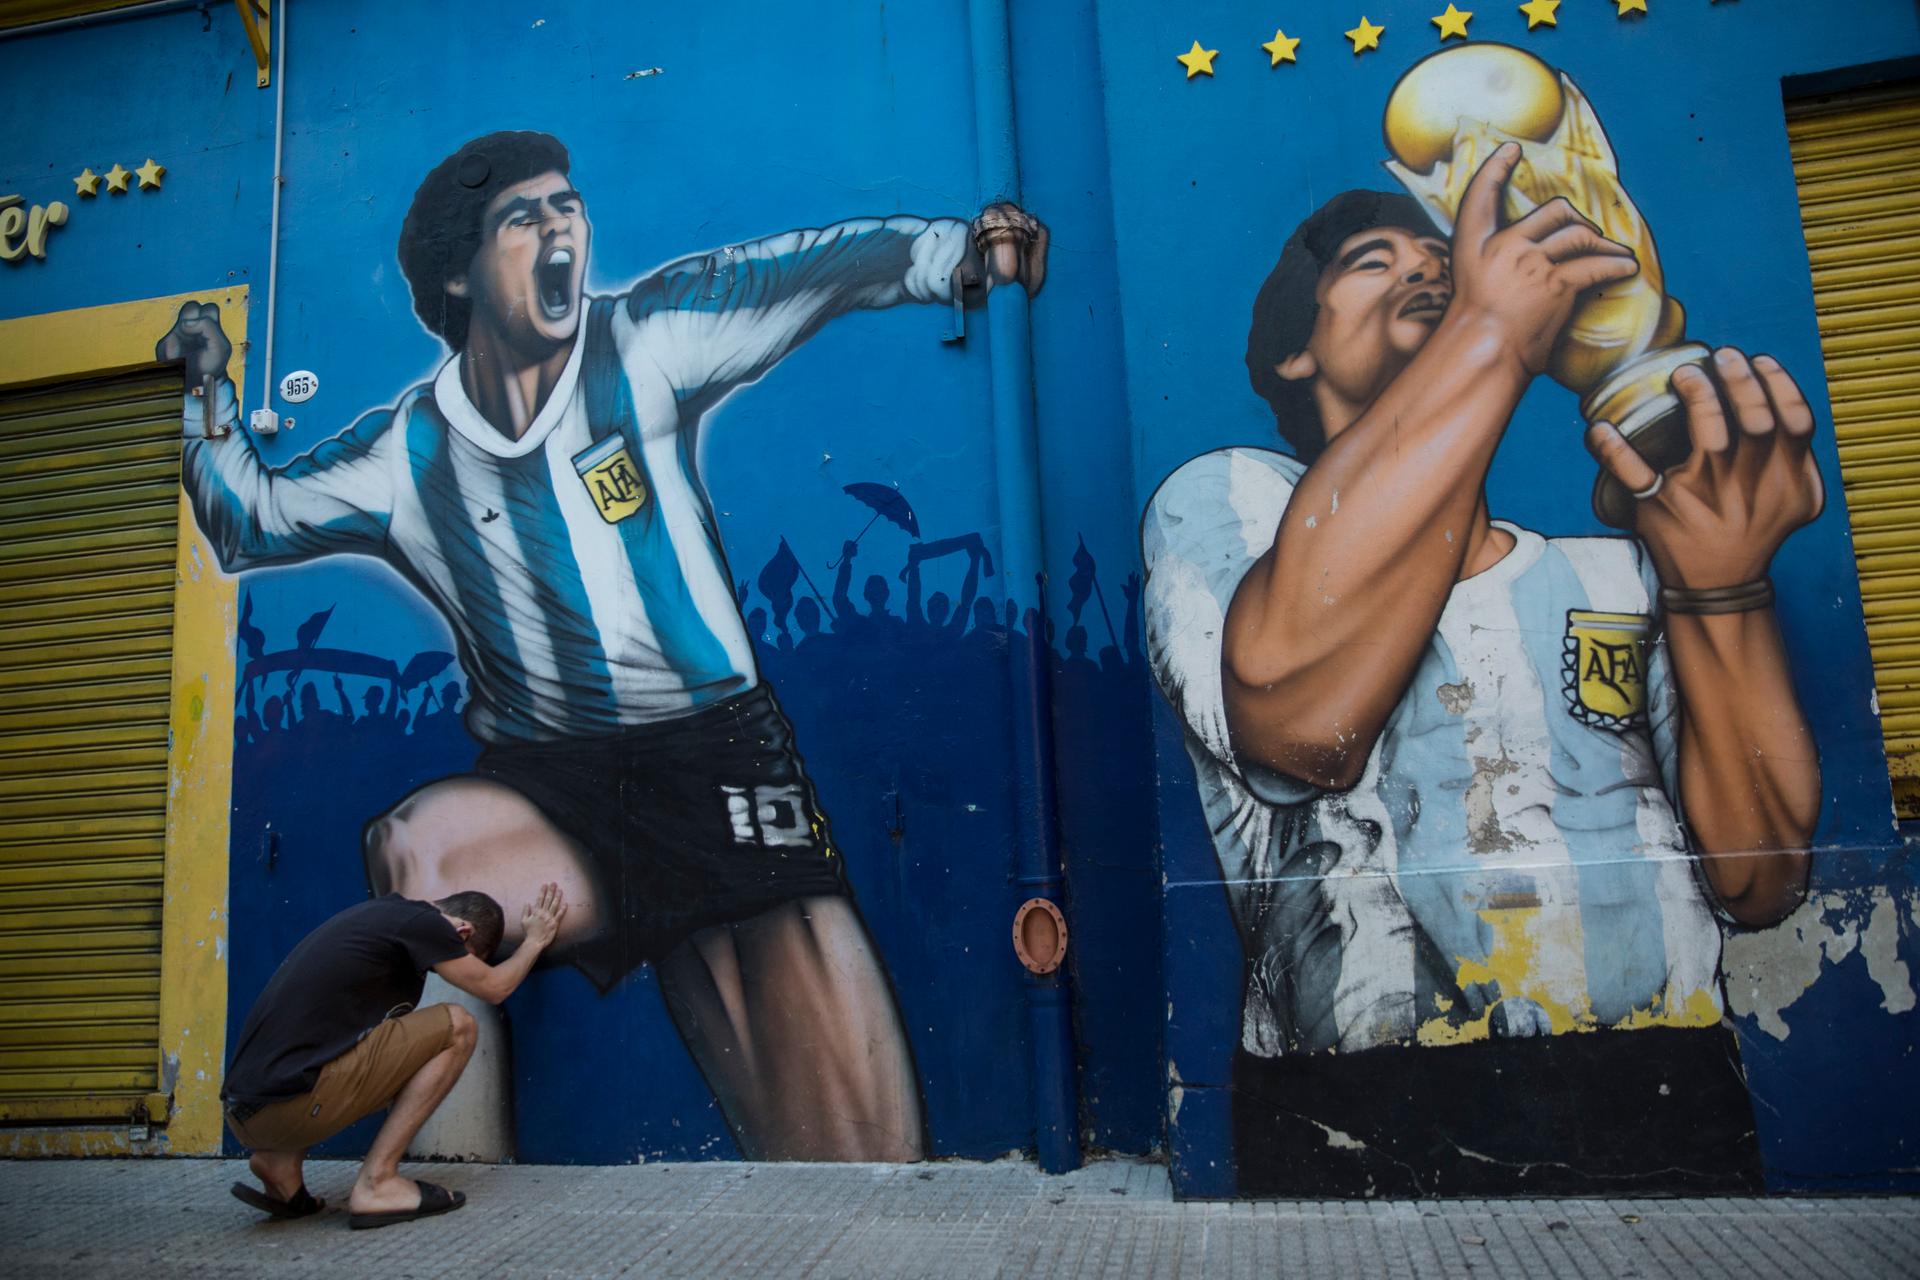 A man prays while touching a painting of Diego Maradona near the Boca Juniors stadium in Buenos Aires, Argentina, Nov. 27, 2020.